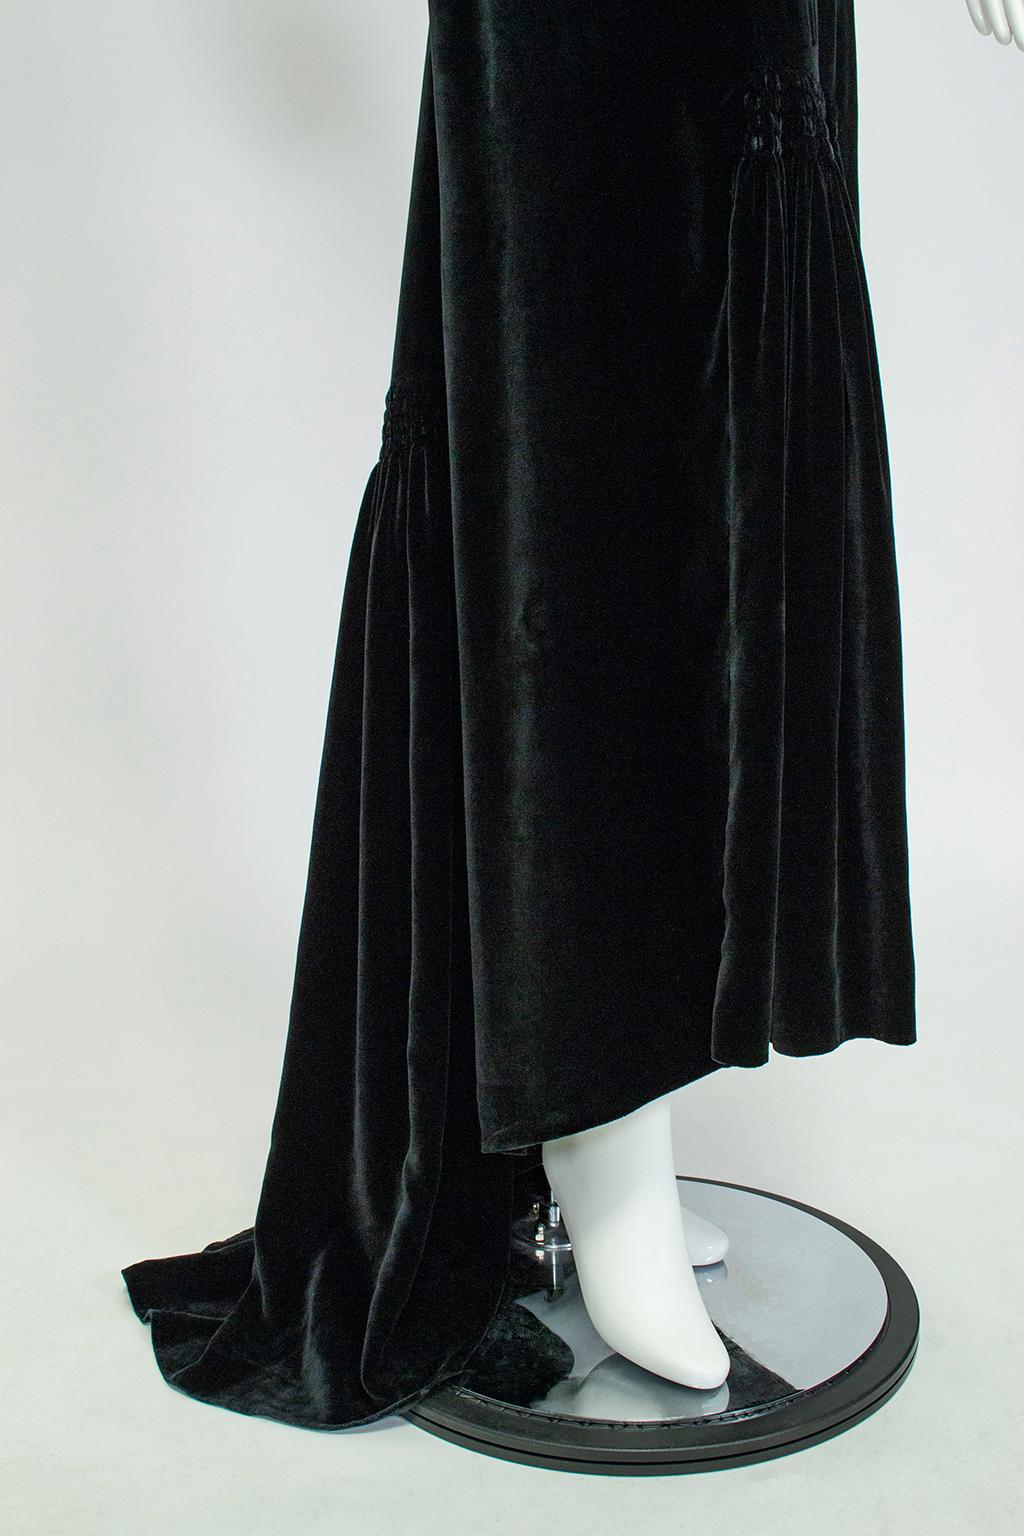 Aesthetic *Large Size* Black Velvet Ruff Collar Gown with Train - L-XL, 1930s 5